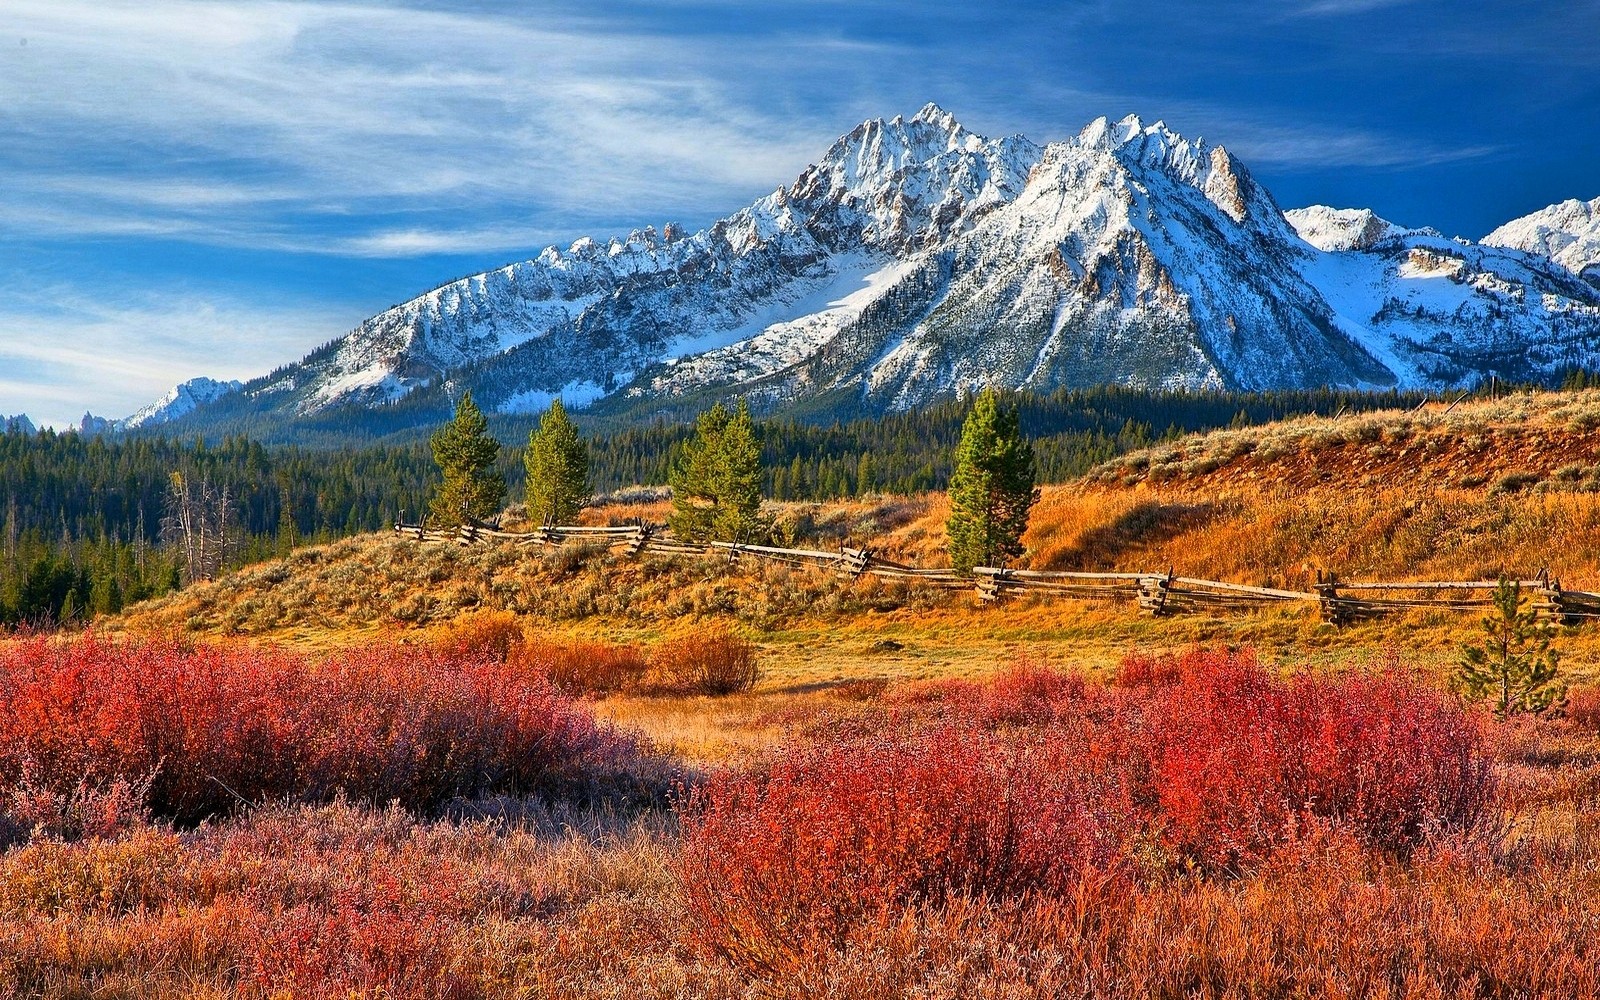 General 1600x1000 nature landscape snowy peak forest grass mountains fence colorful fall Idaho USA snowy mountain